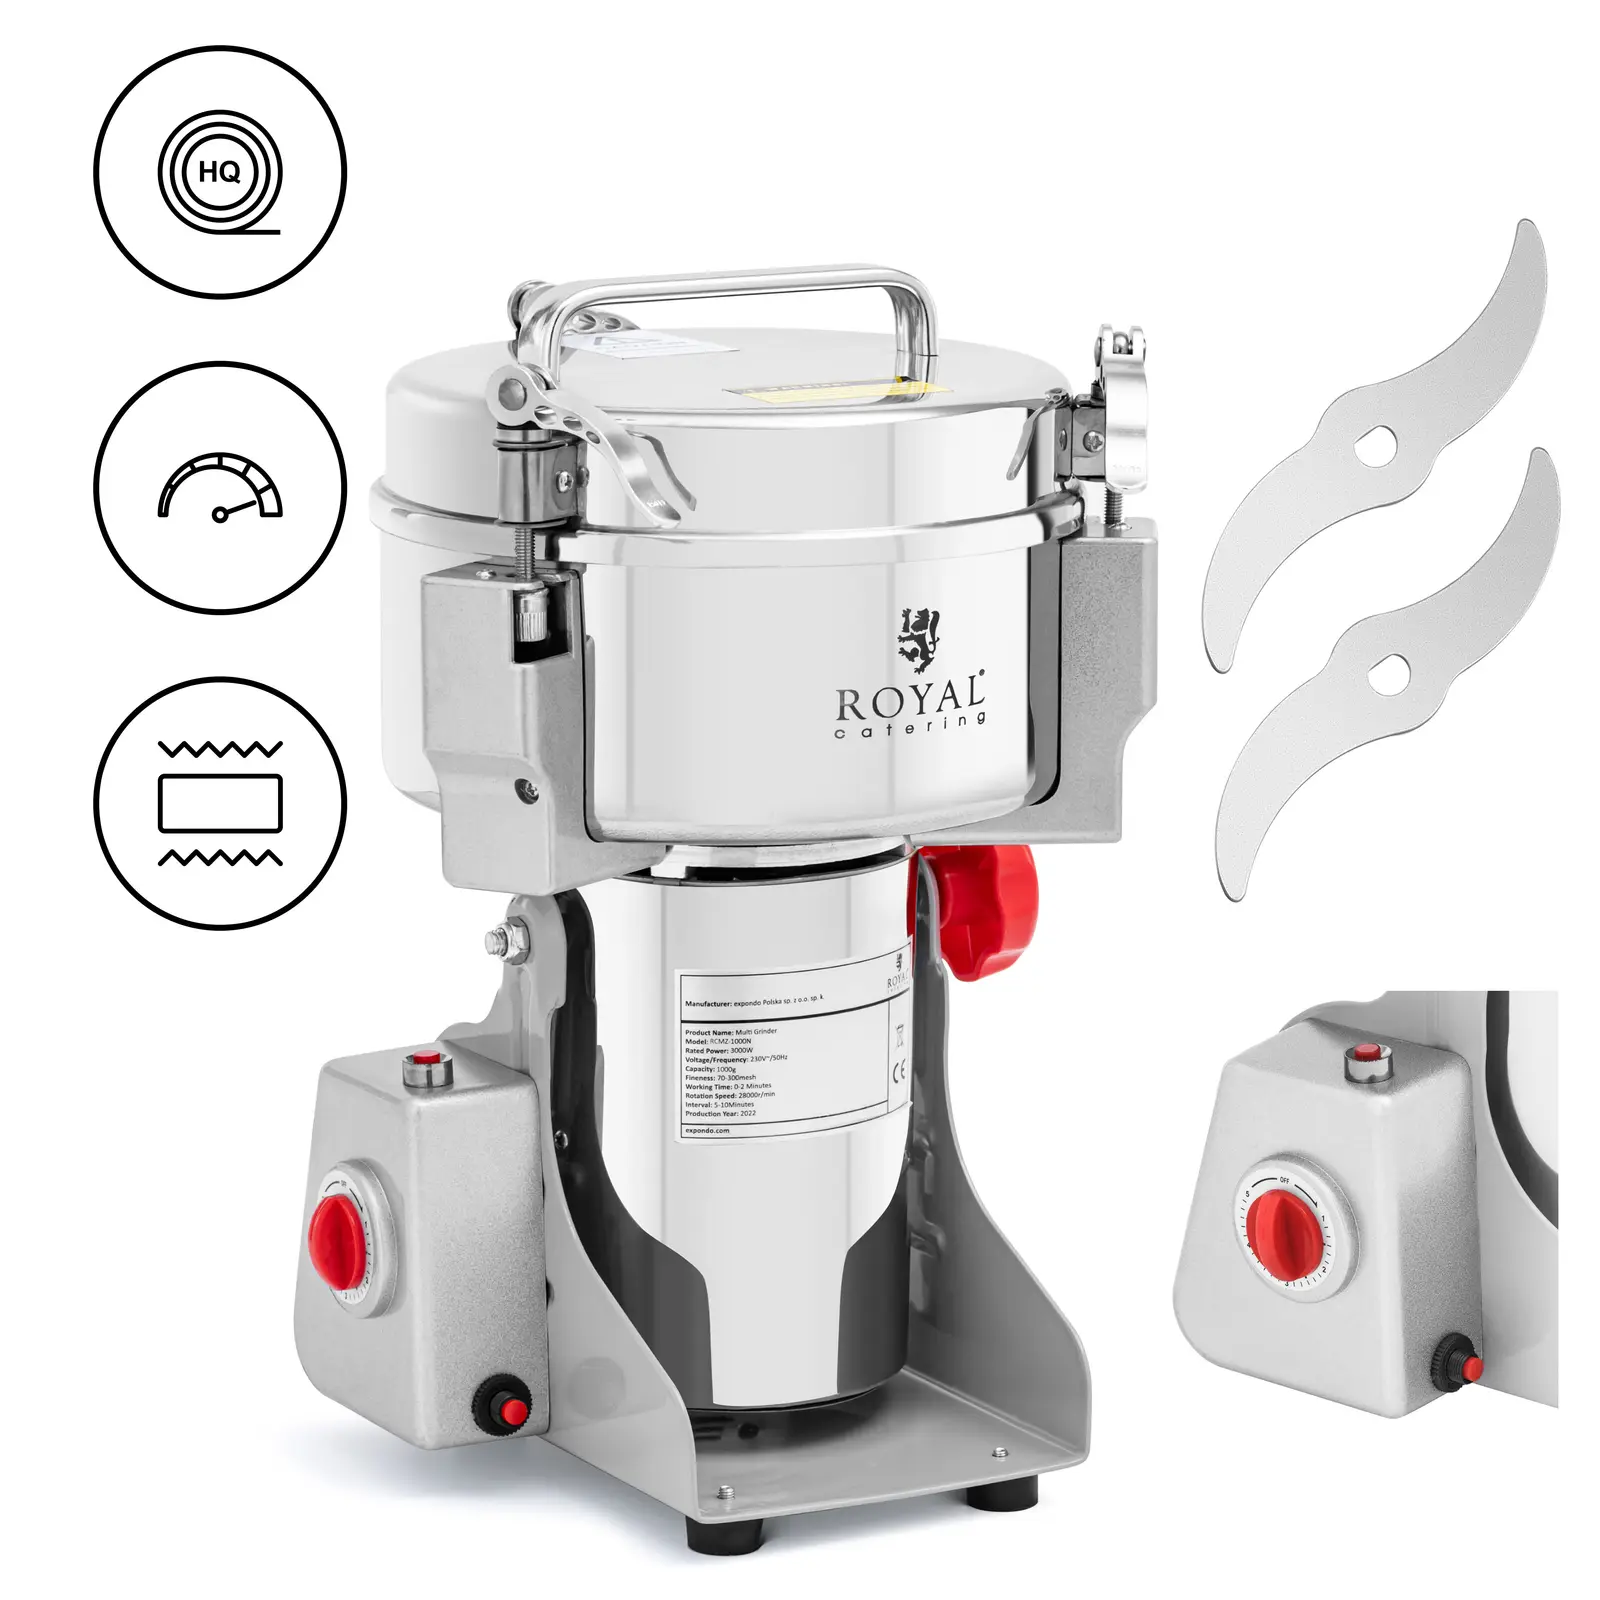 Electric spice grinder - 1000 g - 20 x 9 cm - 3000 W - Royal Catering 